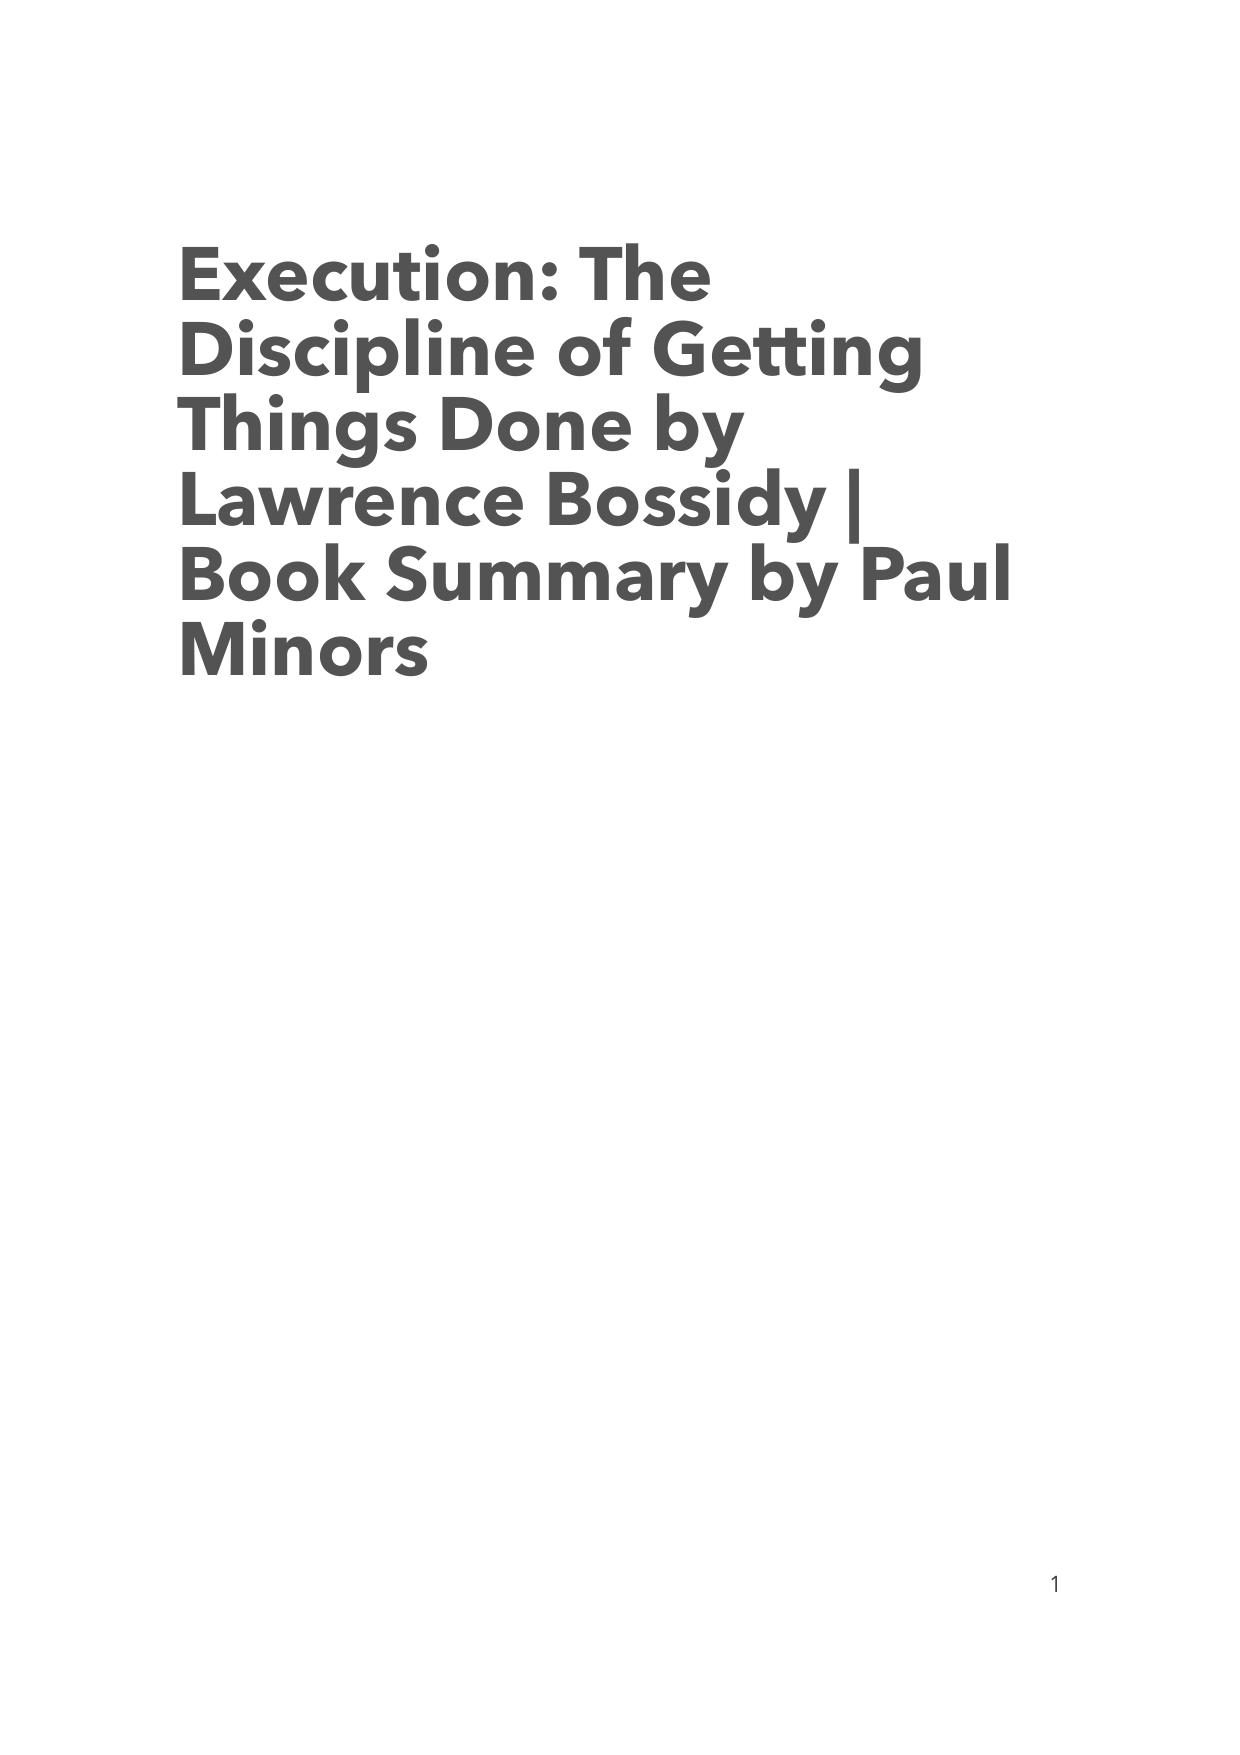 Execution - The Discipline of Getting Things Done by Lawrence Bossidy